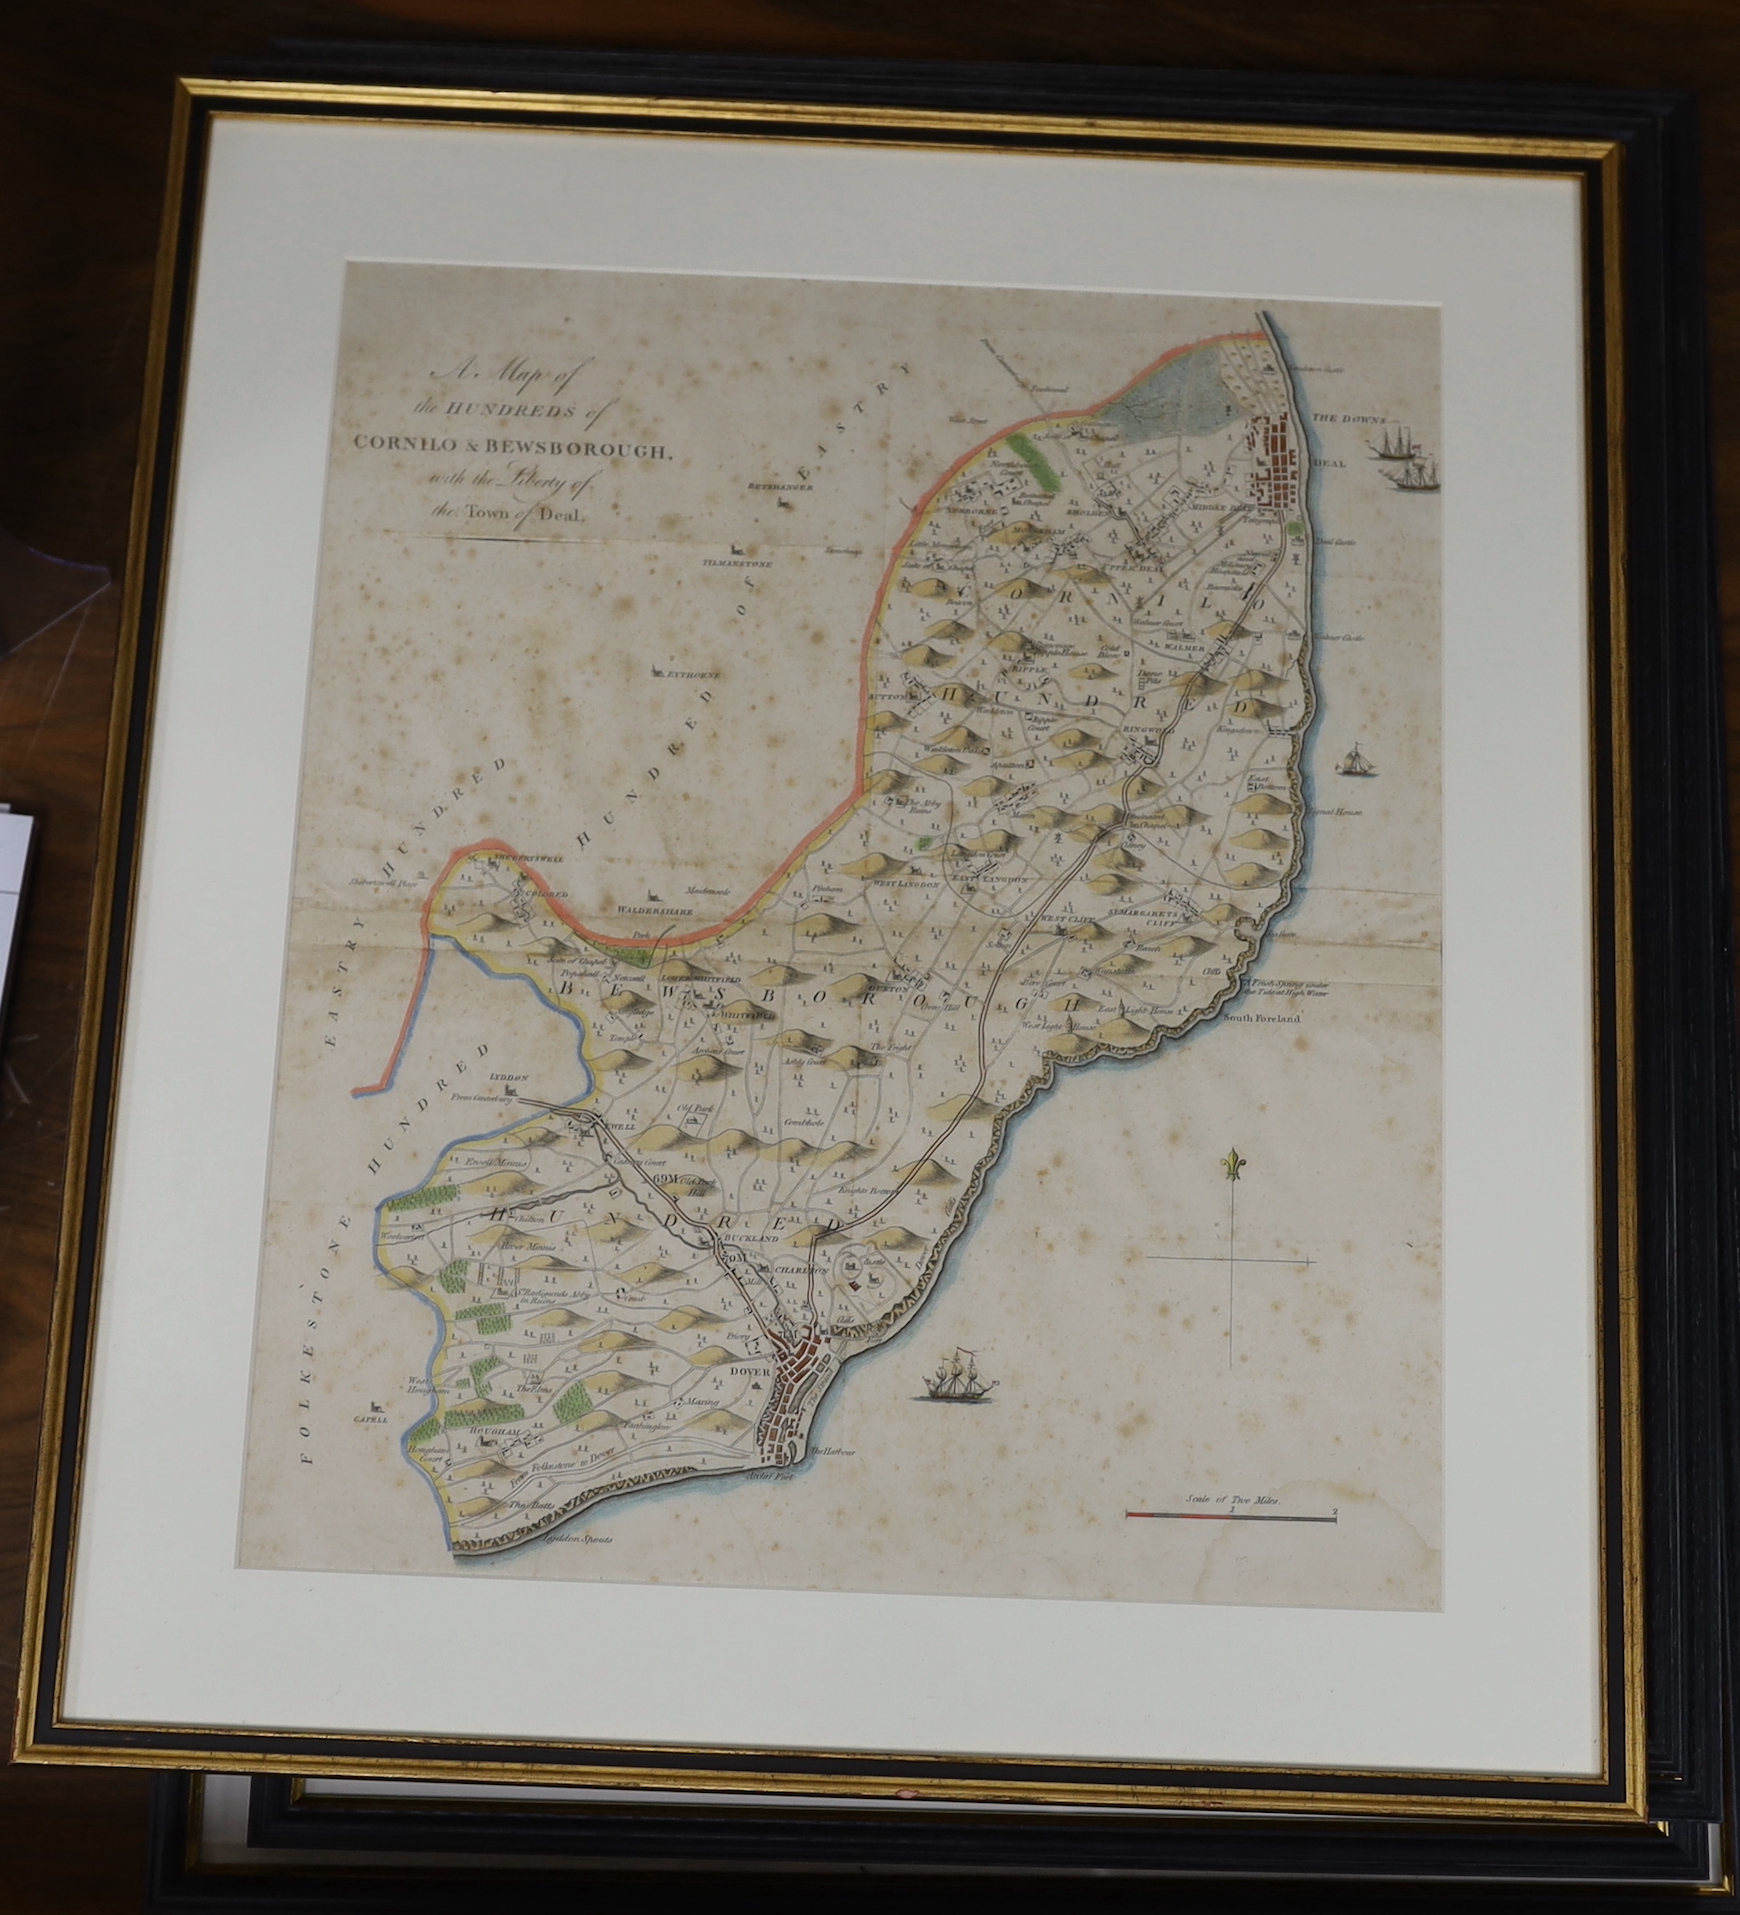 Four 18th / 19th century Map’s of the Hundreds including ‘Loningborough & Folkestone’ together